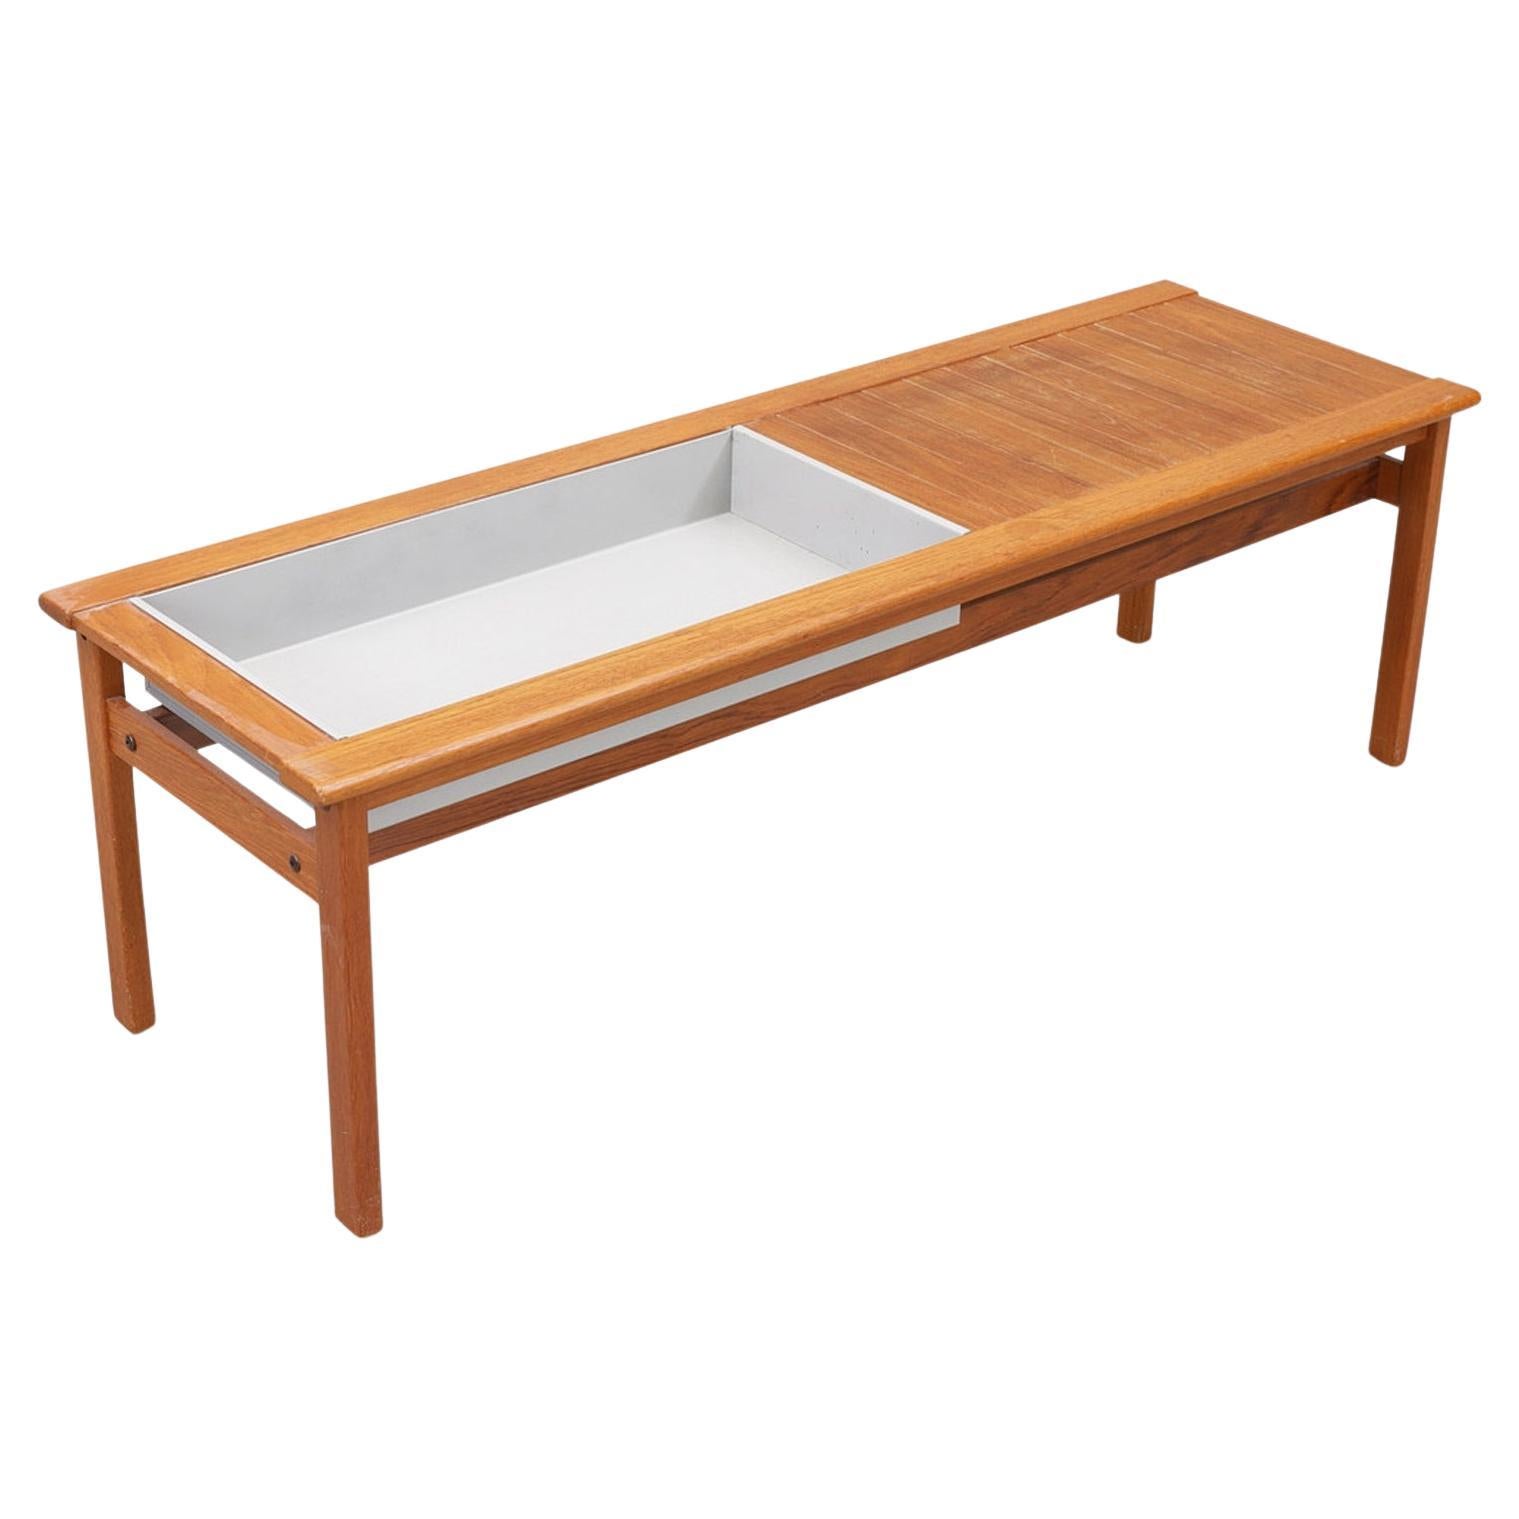 Florida Model Coffee Table / Planter in Teak by Ingvar Andersson For Sale